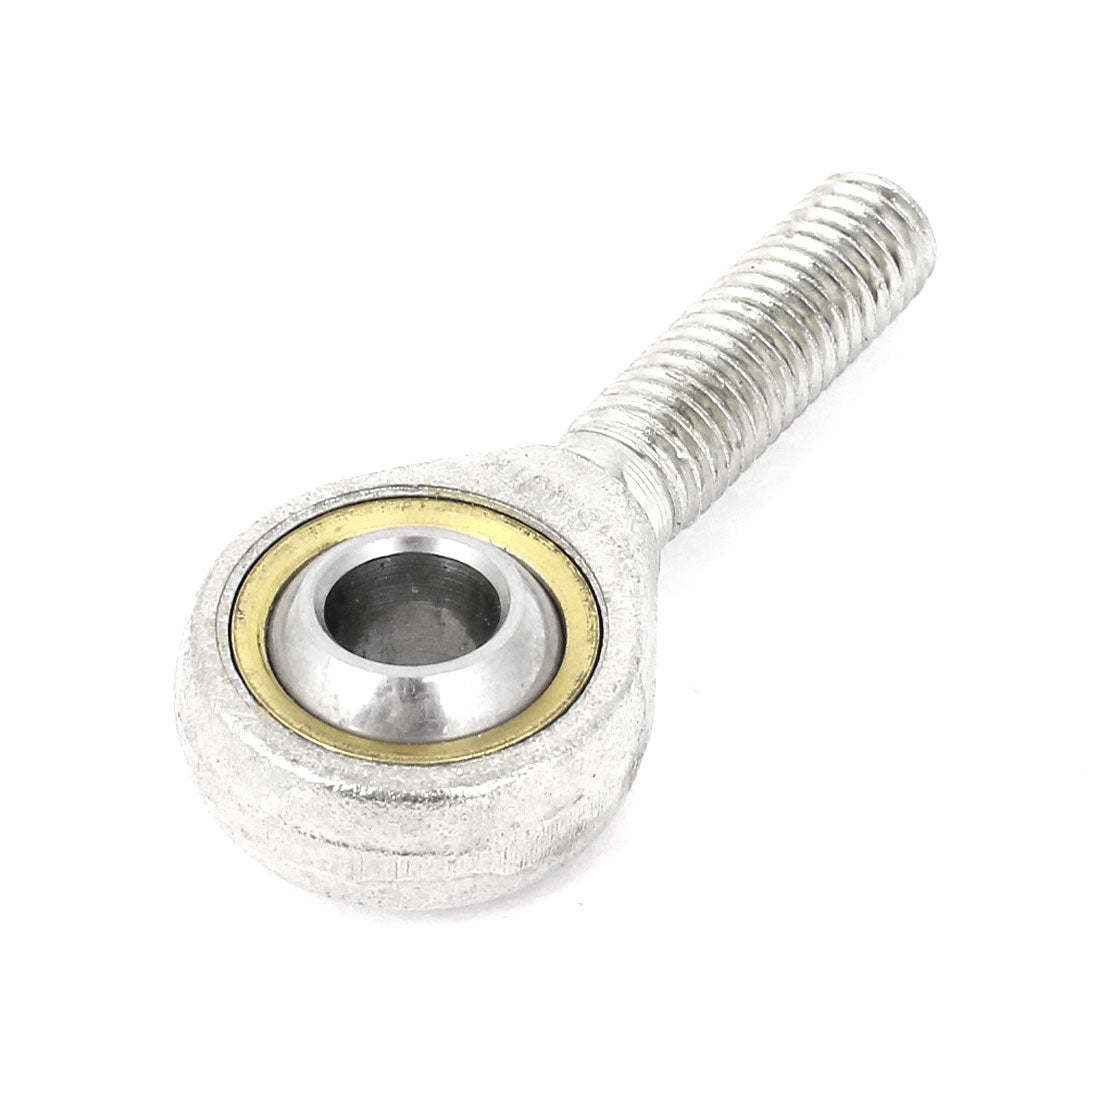 uxcell Uxcell SA 10 10mm Ball Dia Self-lubricating Male Thread Machinery Rod End Bearing